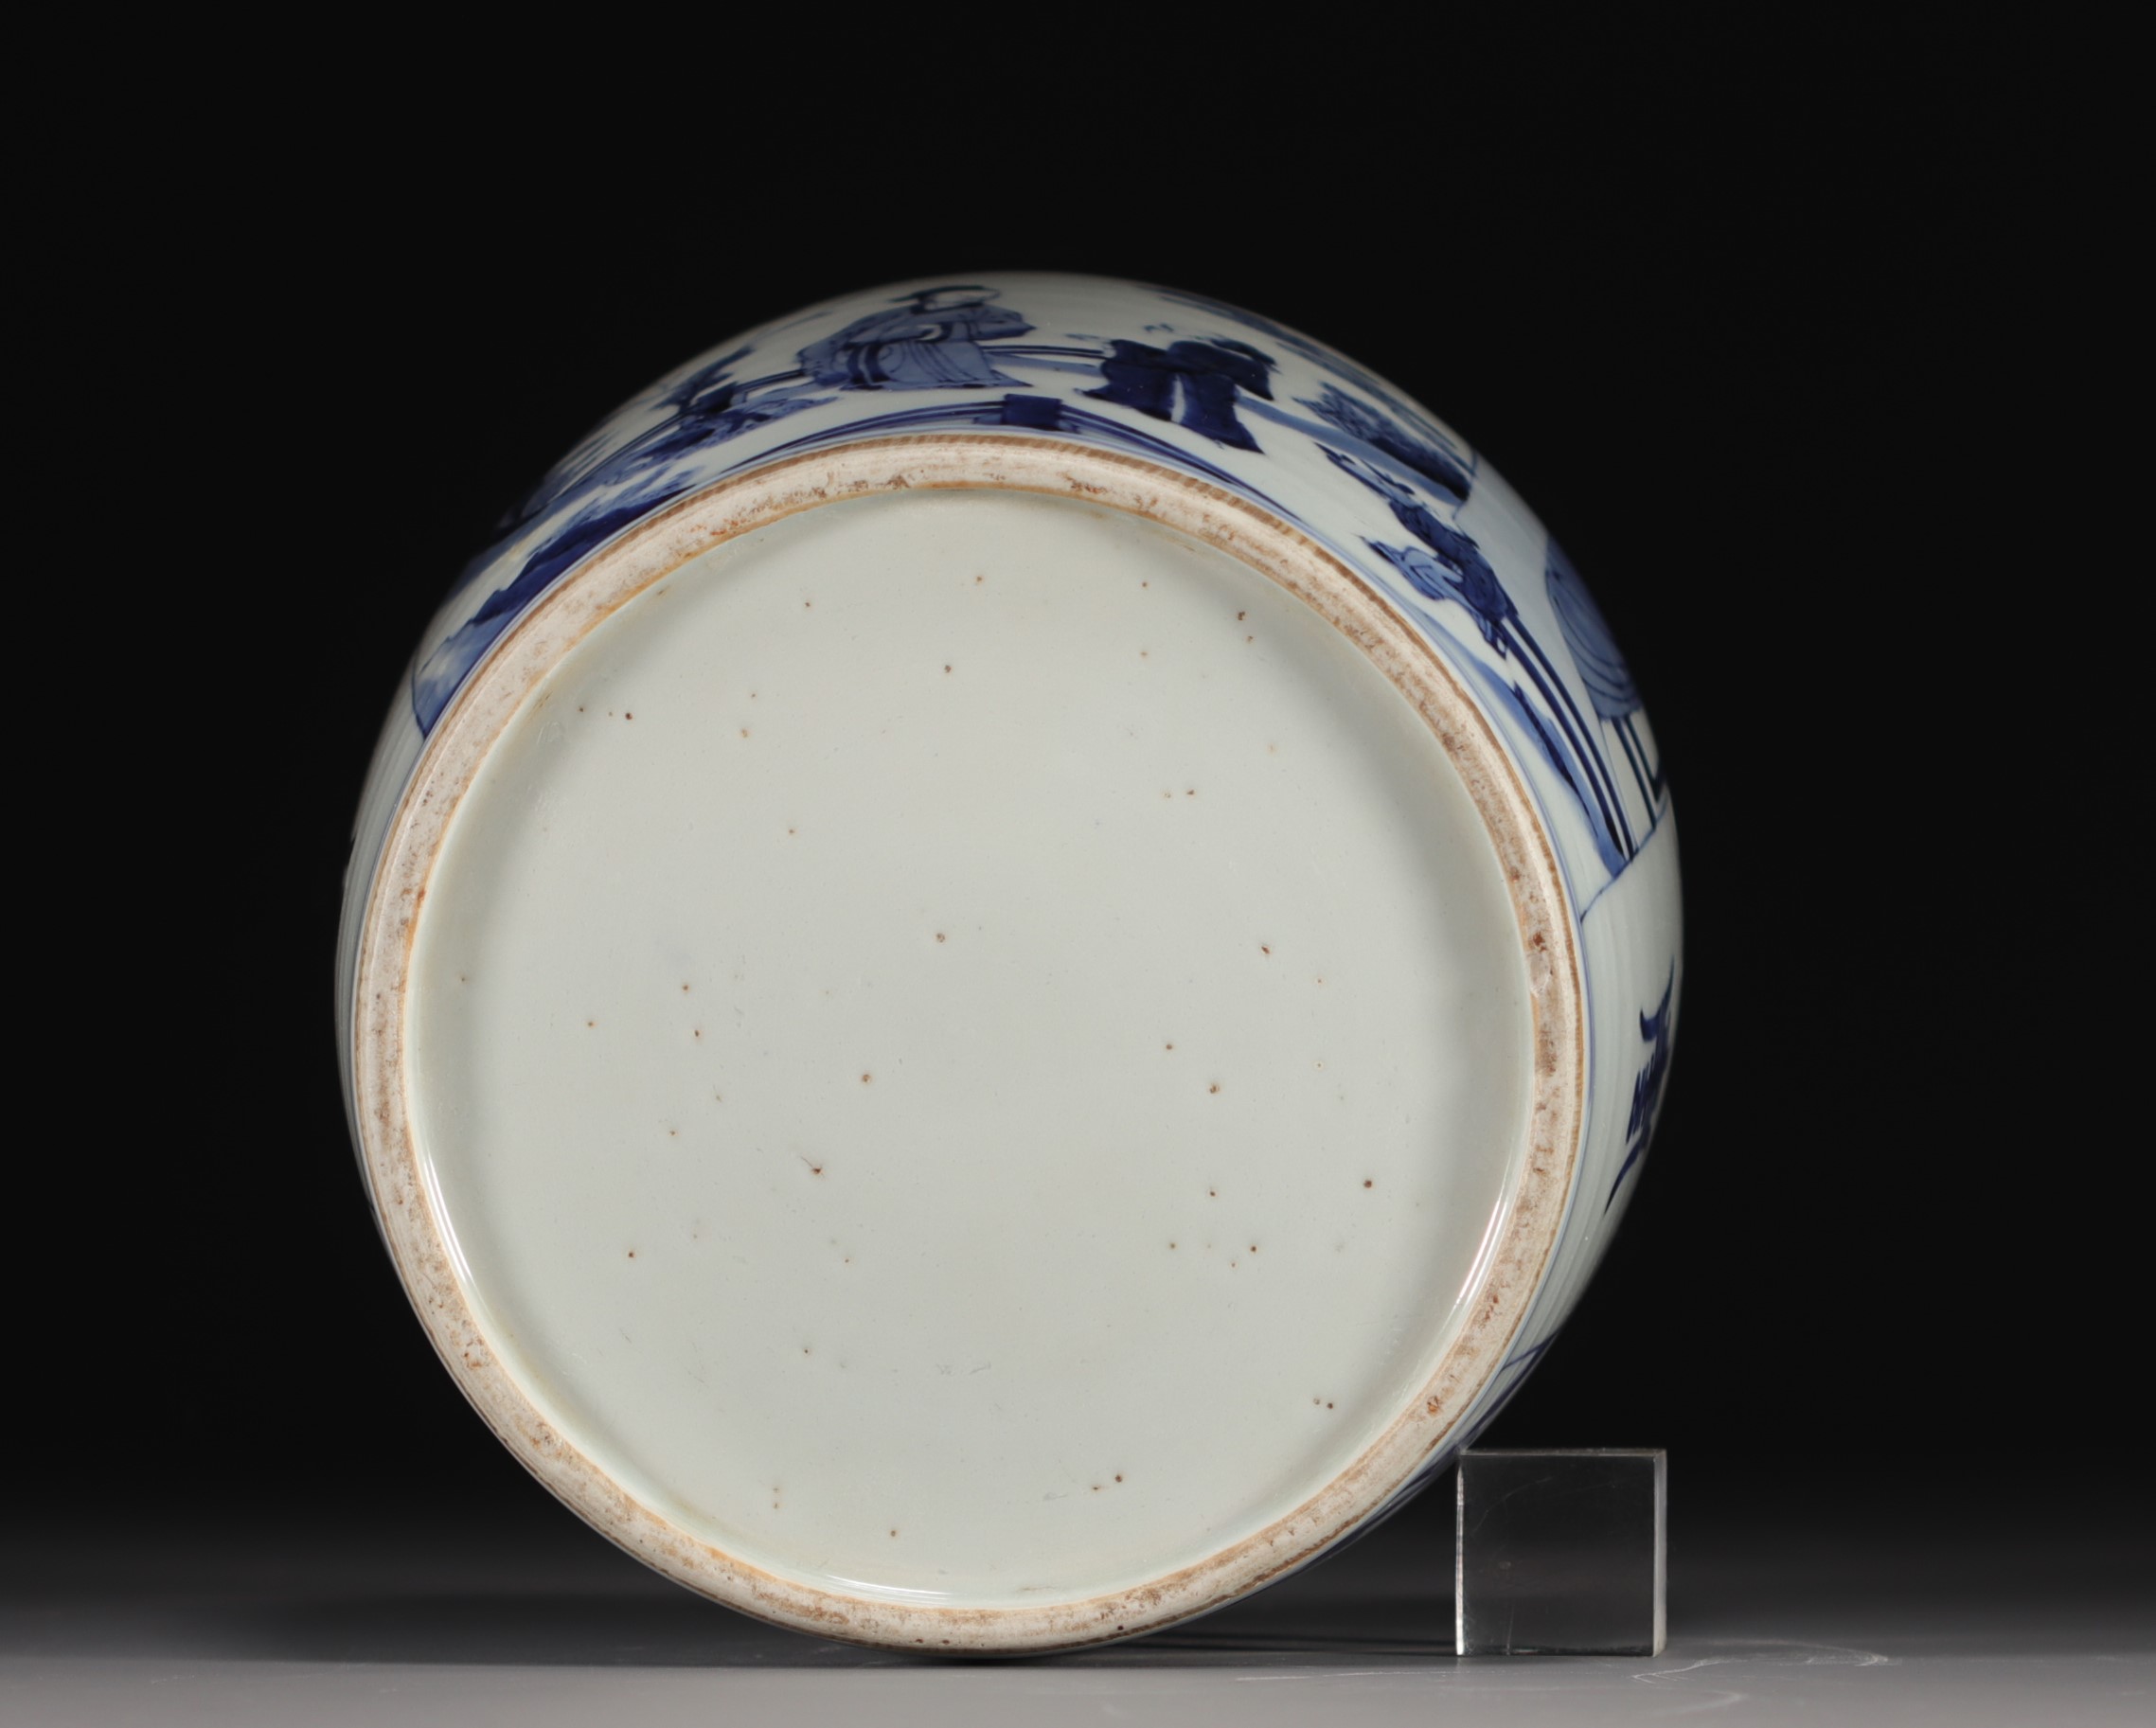 China - Perfume burner in blue porcelain with figures, 18th century. - Image 5 of 7